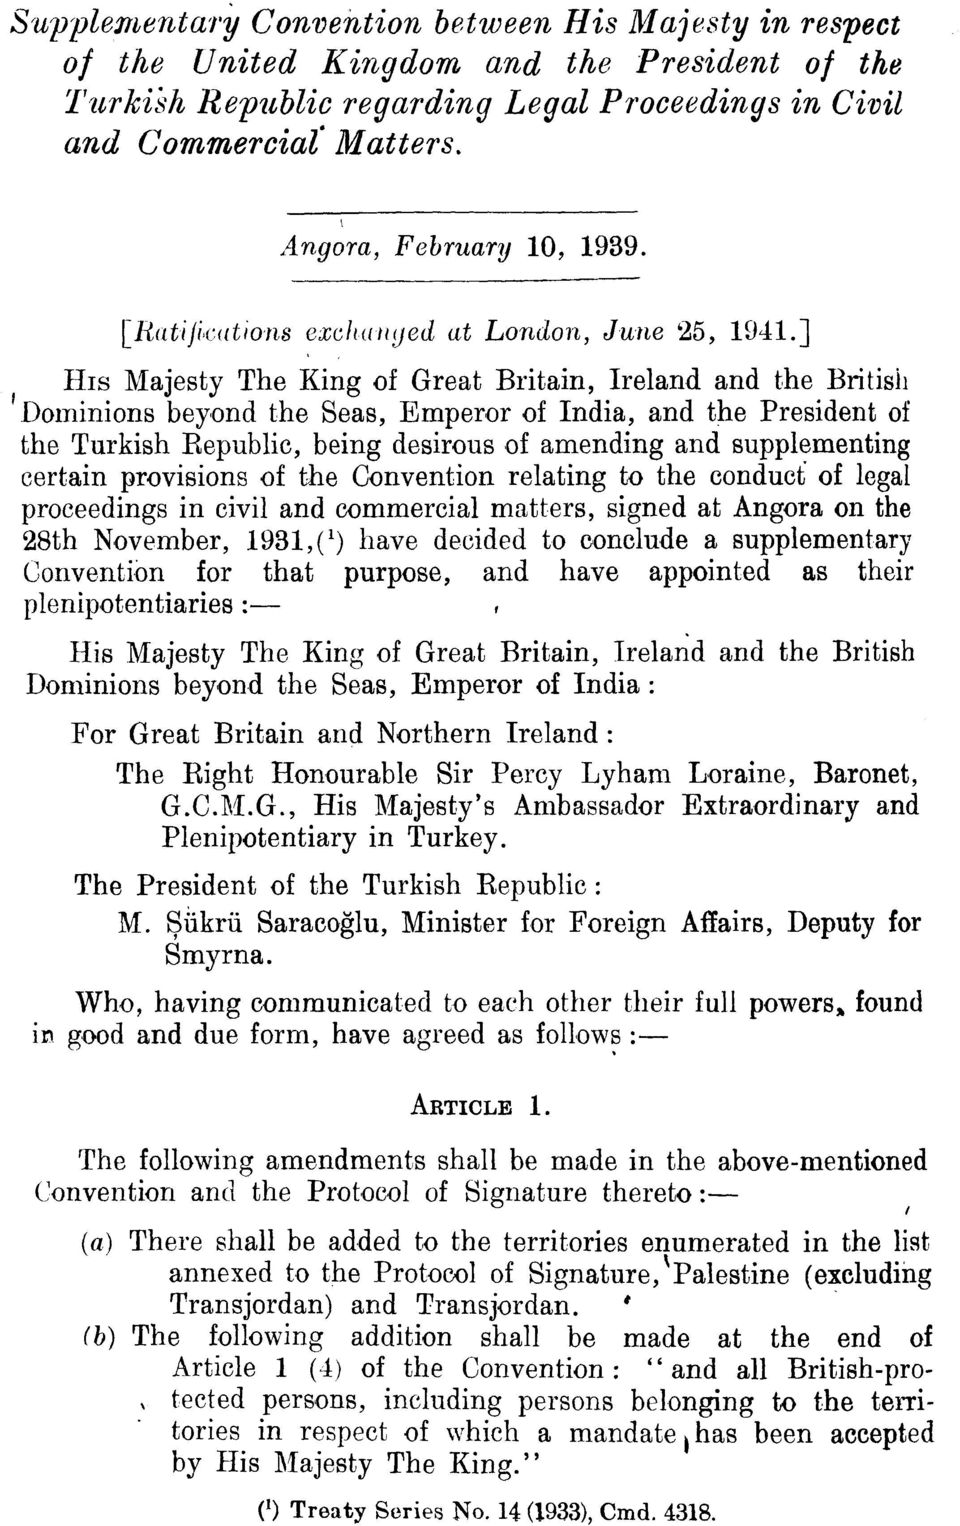 ] His Majesty The King of Great Britain, Ireland and the British Dominions beyond the Seas, Emperor of India, and the President of the Turkish Republic, being desirous of amending and supplementing